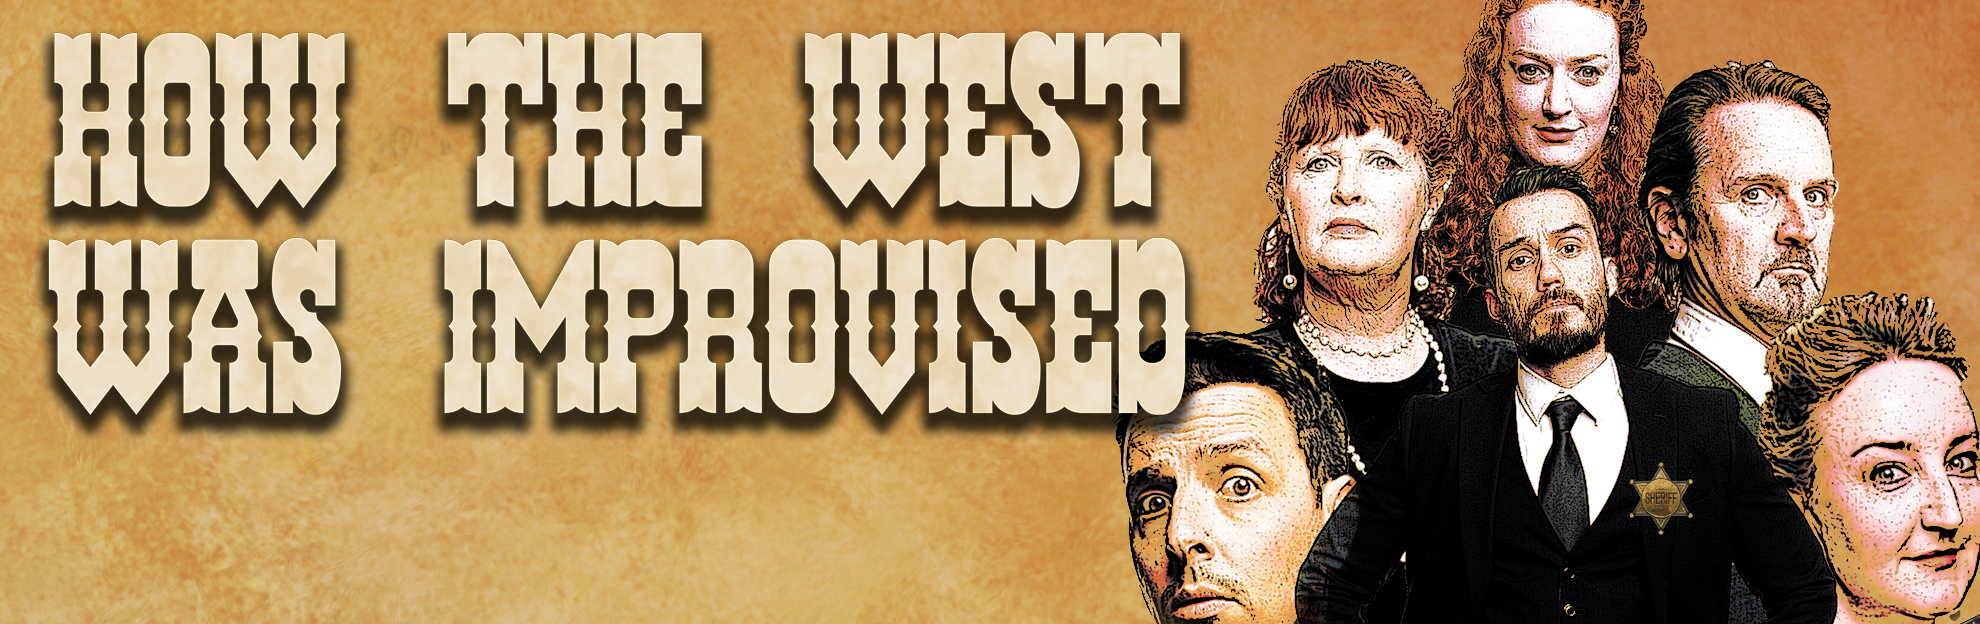 How The West Was Improvised